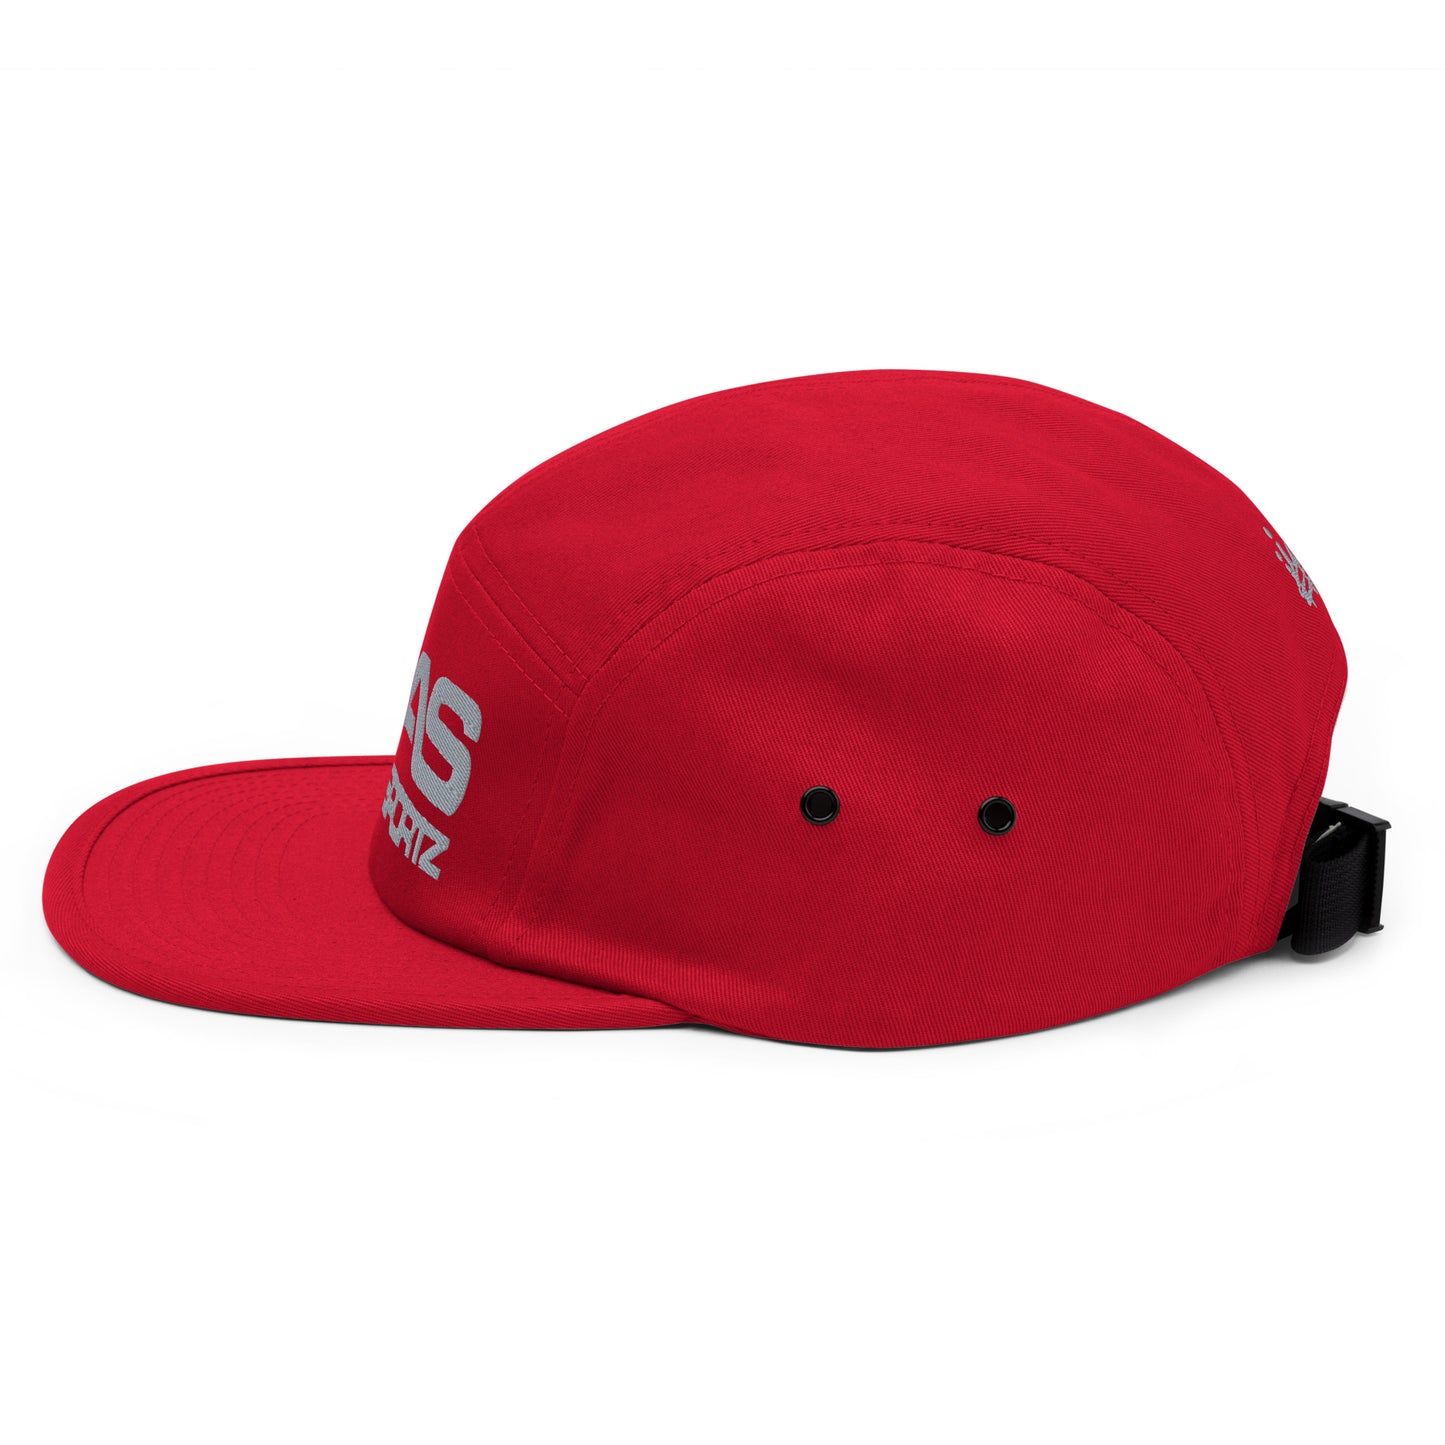 AS FLAG RED Five Panel Cap